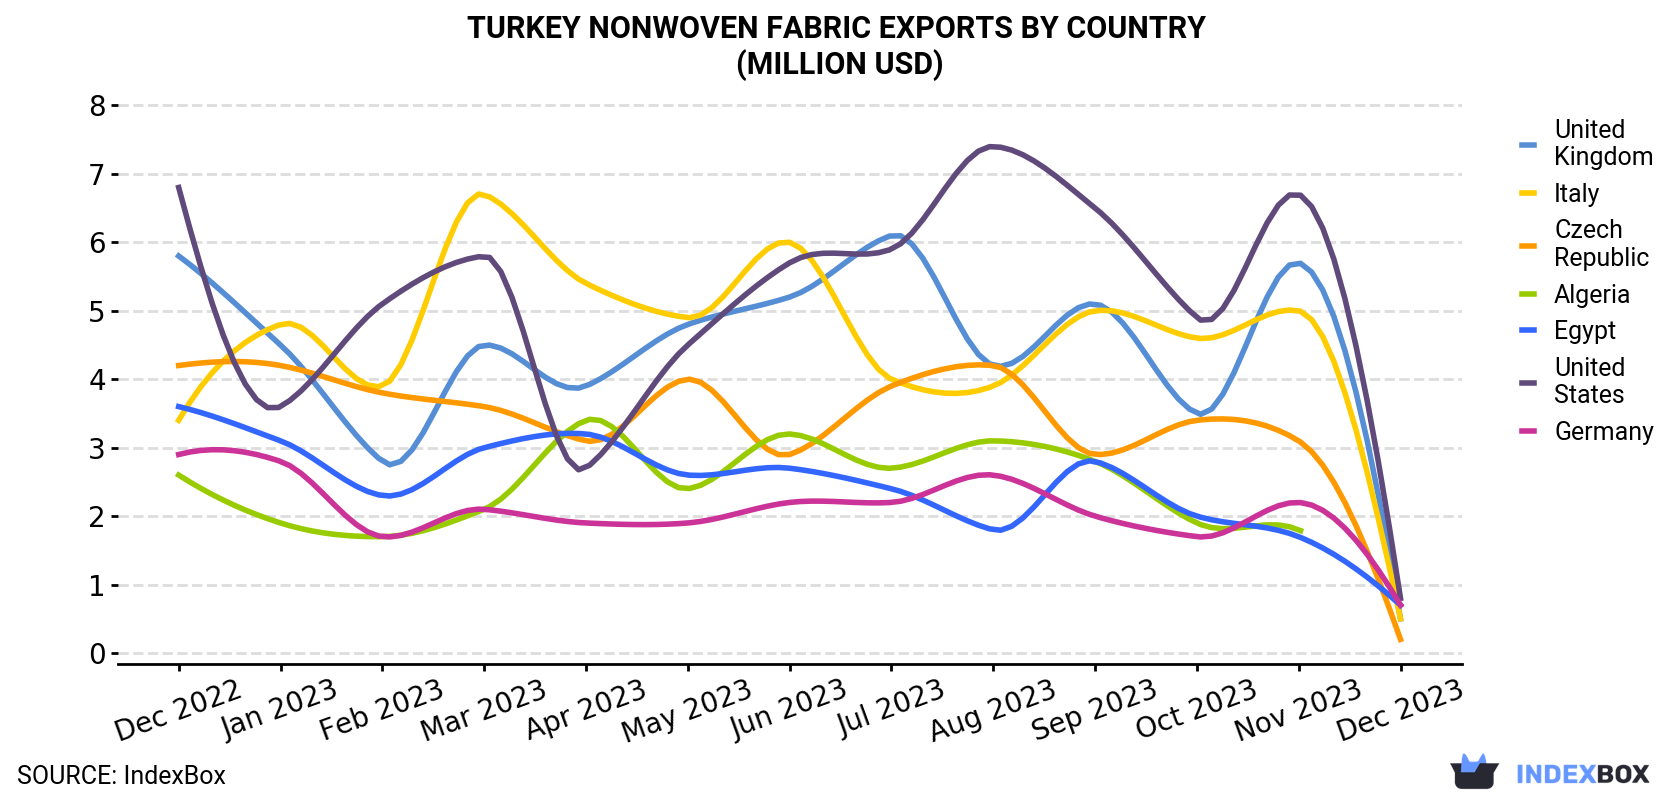 Turkey Nonwoven Fabric Exports By Country (Million USD)